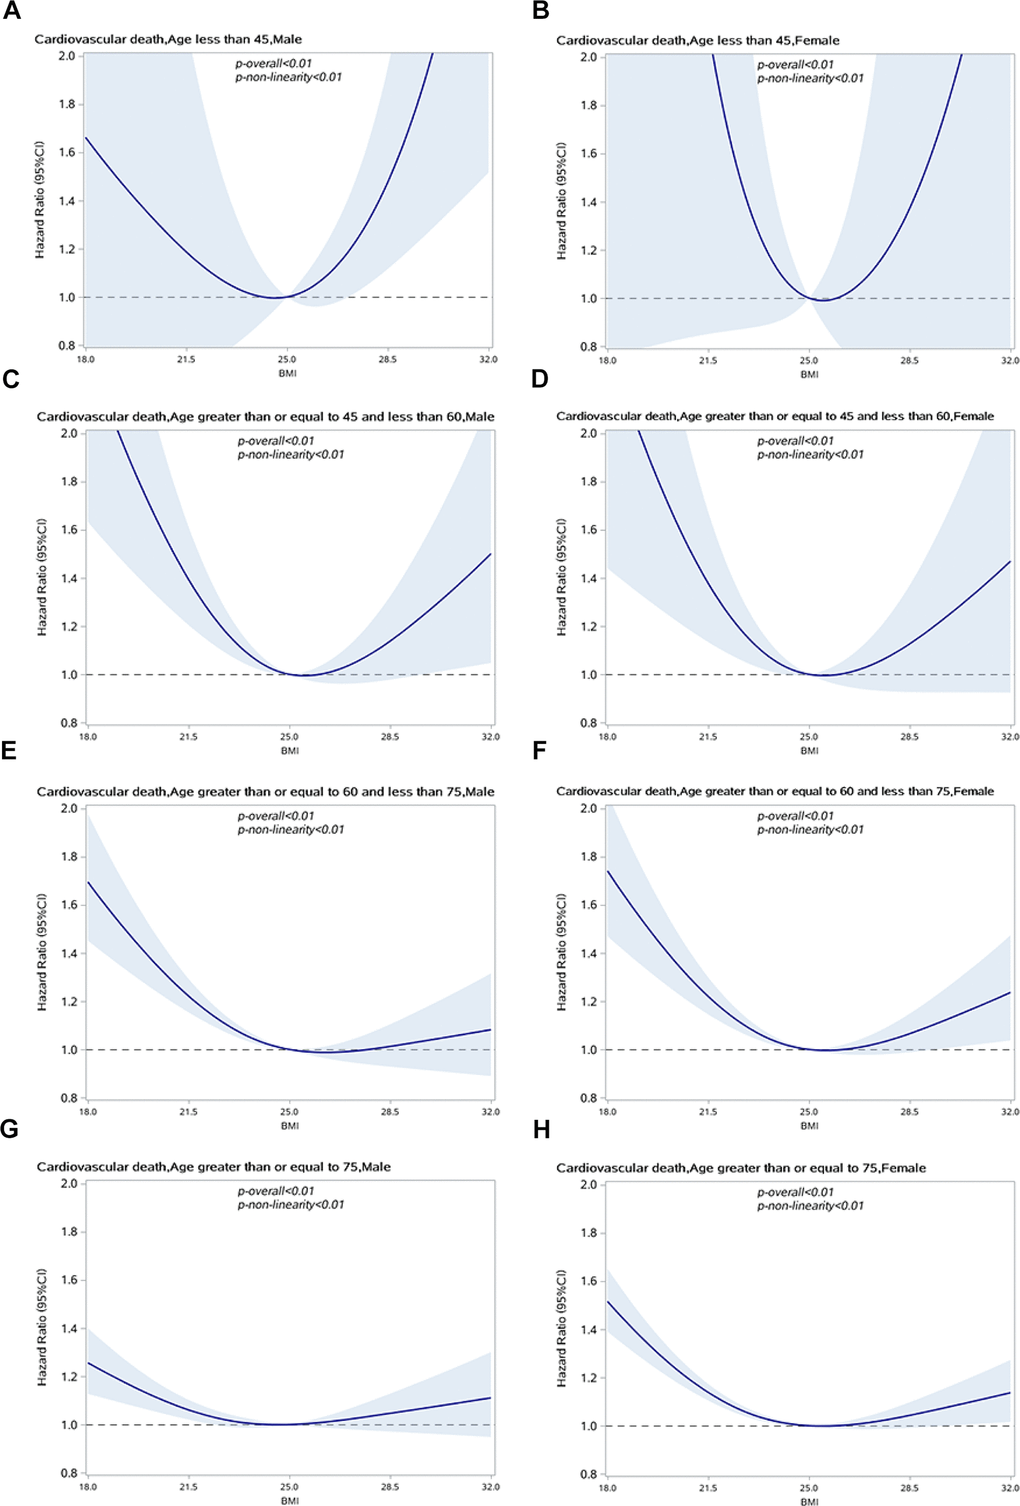 Association between BMI and CVD specific mortality in people with hypertension by sex and age group. (A) Male, ageB) Female, ageC) Male, 45D) Female, 45E) Male, 60F) Female,60G) Male, age>70; (H) Female, age>70.